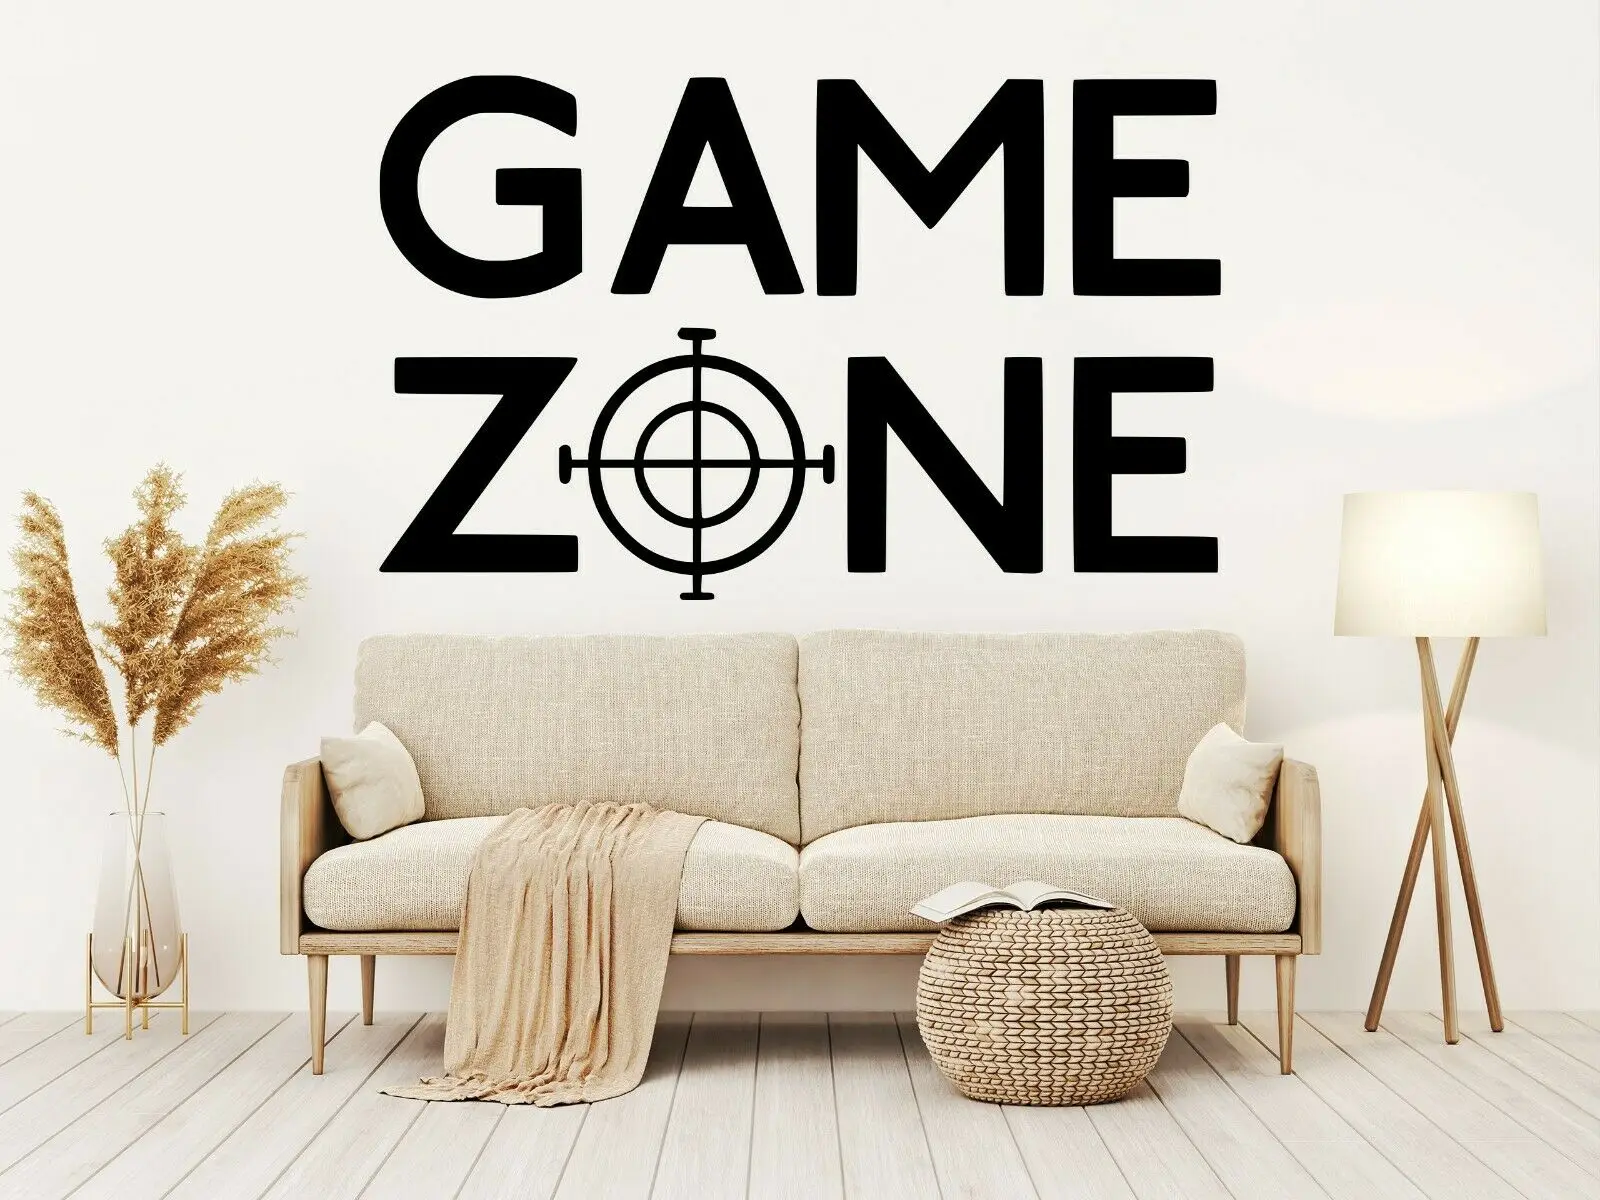 

Game Zone Wall Art Stickers Decal Decor Vinyl Poster Mural removeable Custom DIY Kids gift